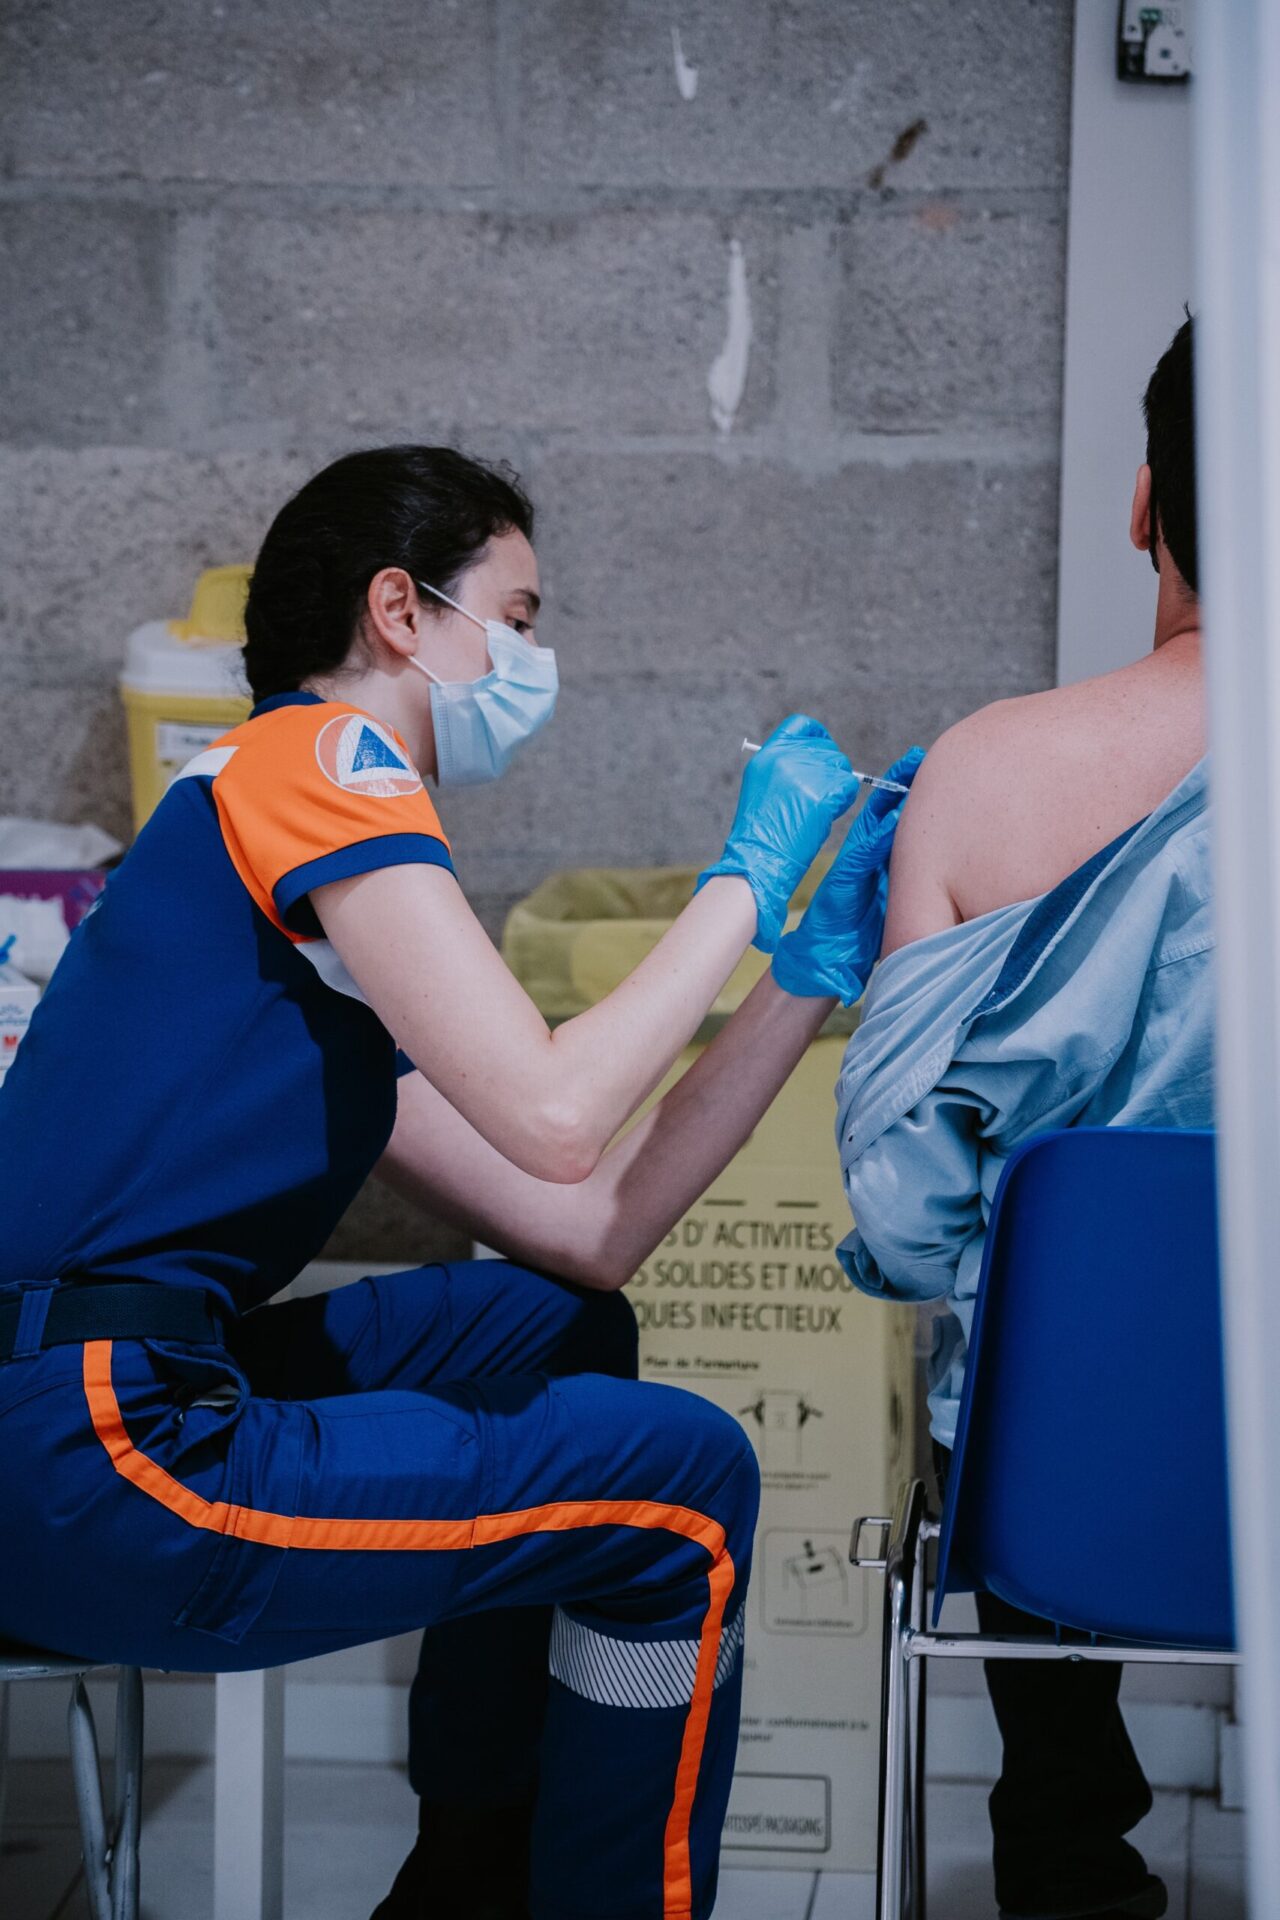 a woman in a blue and orange uniform give a vaccine to a man